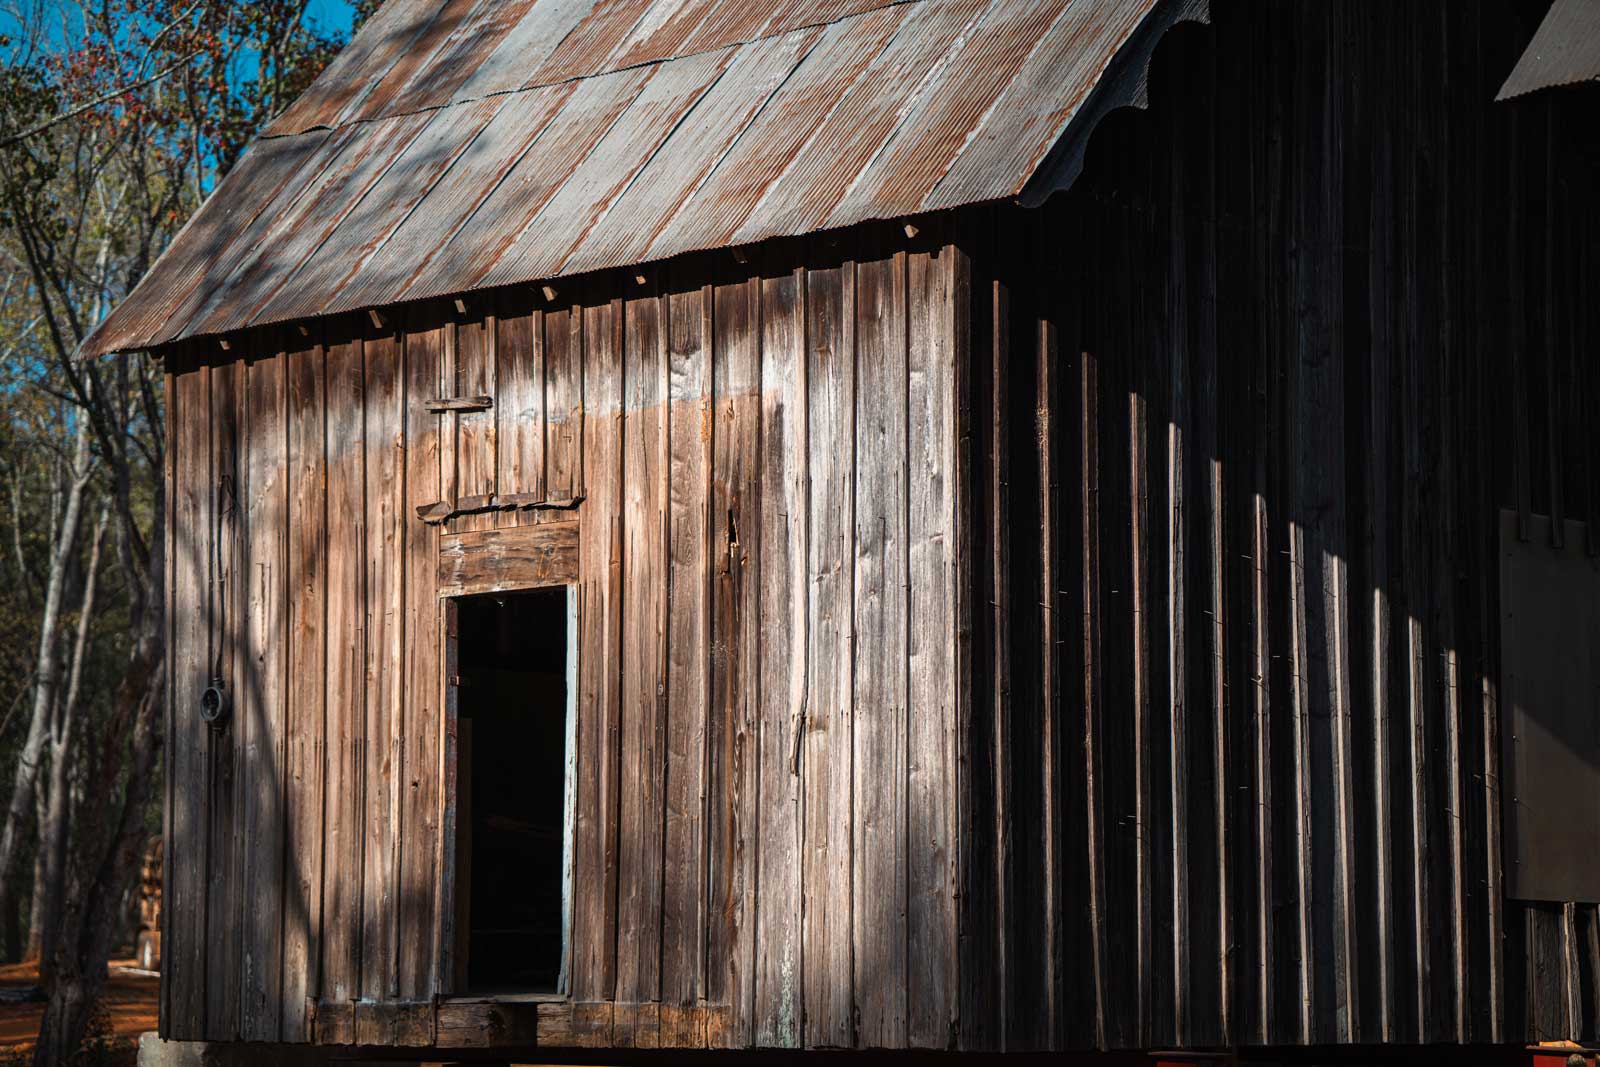 A photo of one of the two authentic dwellings in which enslaved people lived on a nearby plantation that visitors can see at Freedom Monument Sculpture Park.